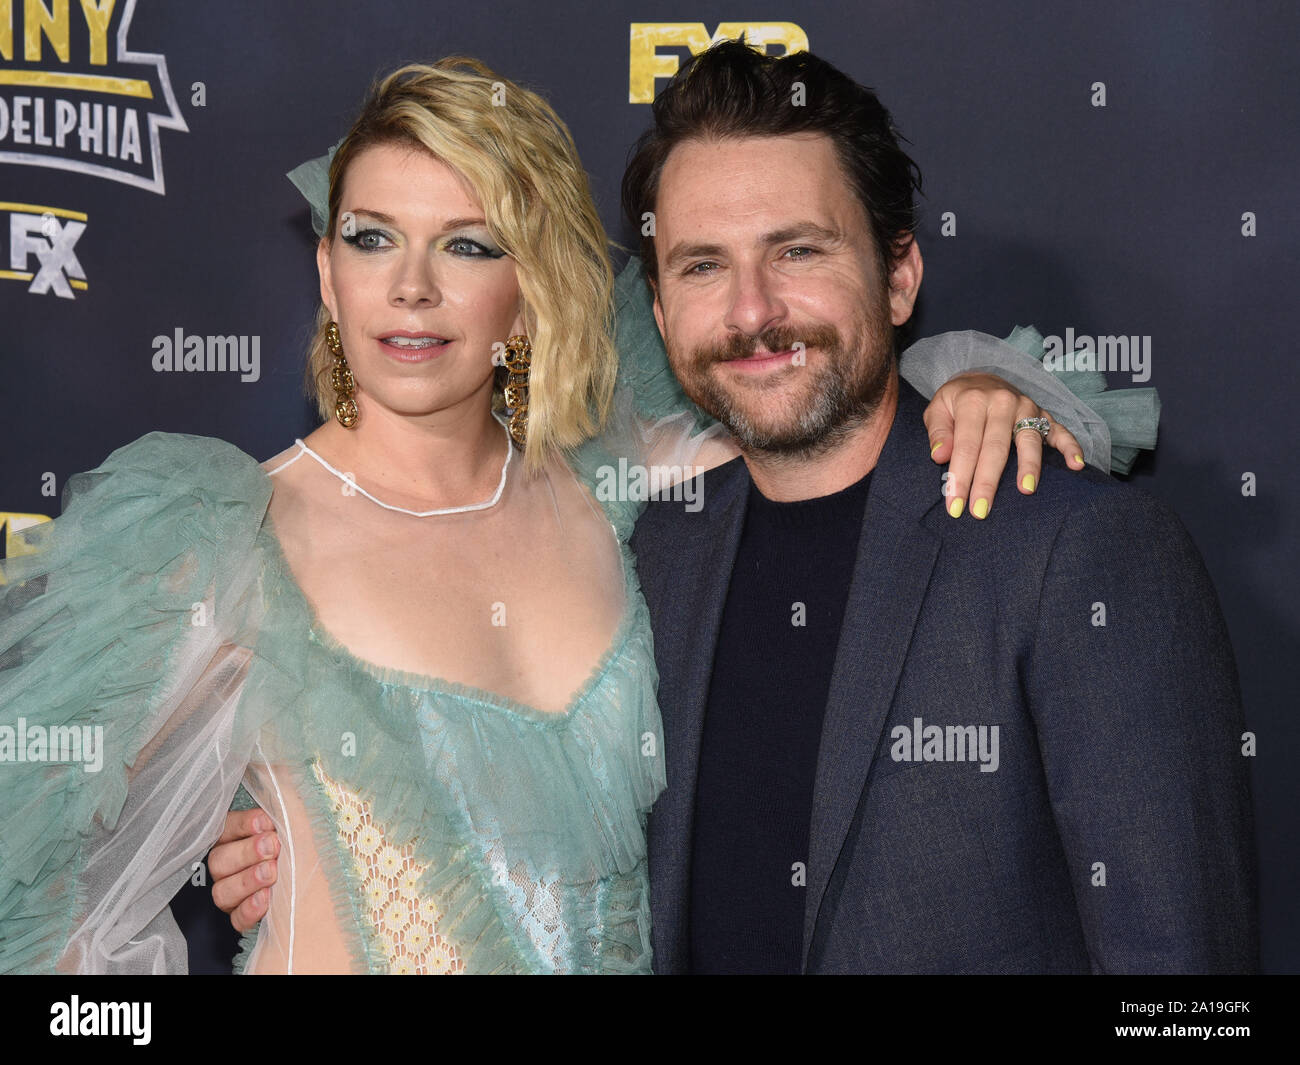 Charlie Day with his wife Mary Elizabeth Ellis